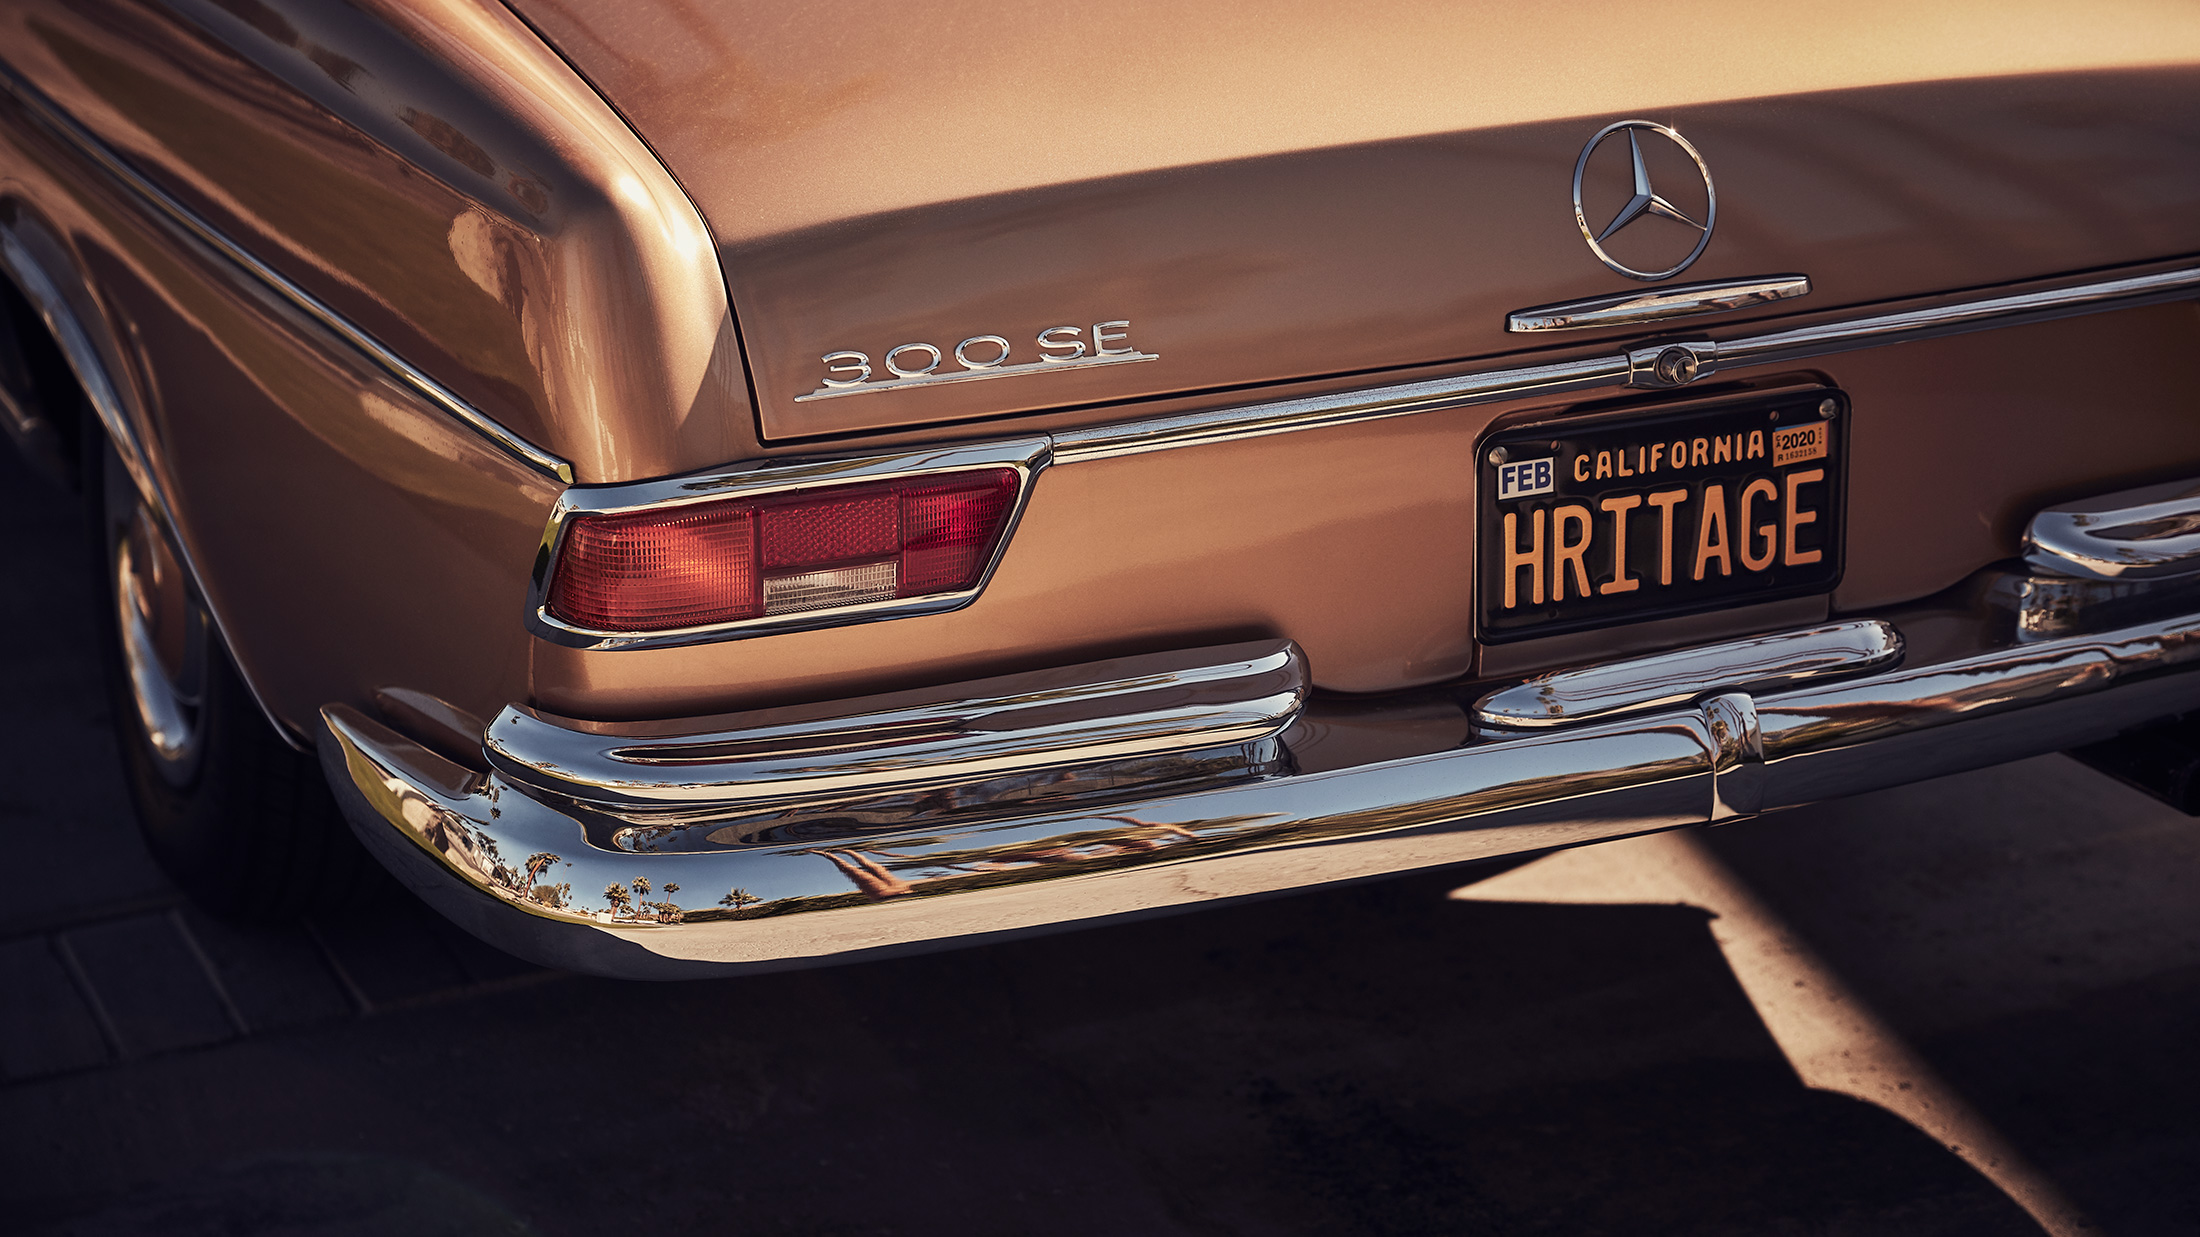 Mercedes 300 | Palm Springs | Aaron Cobb Commercial Photography